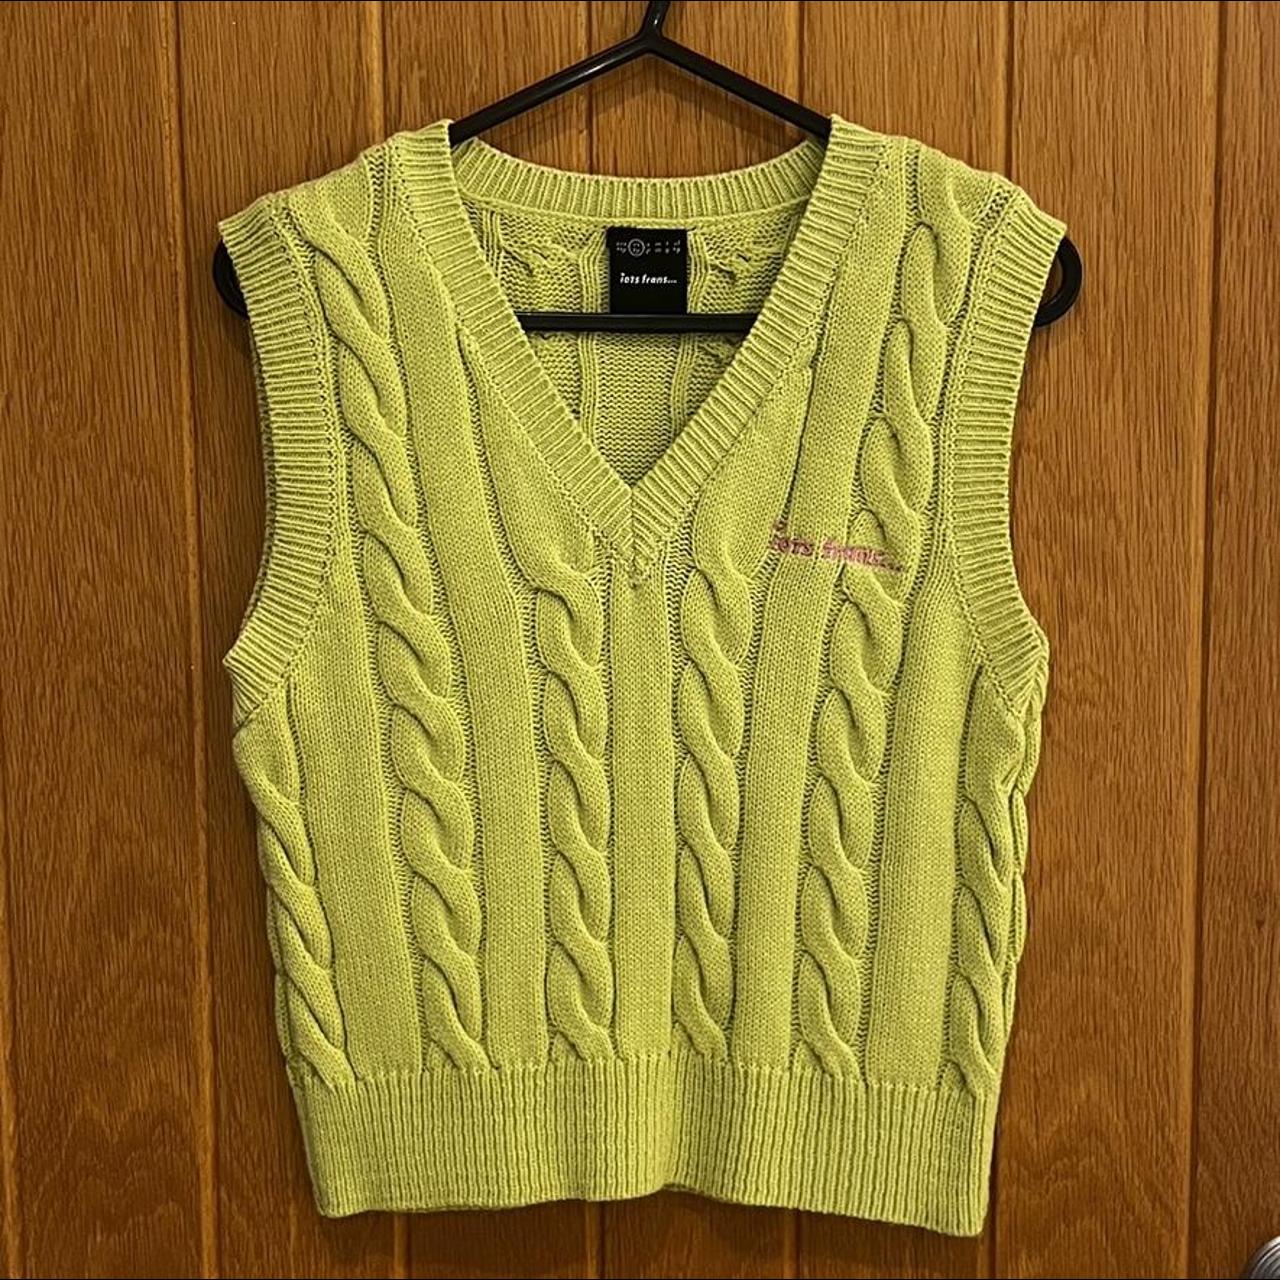 Urban Outfitters green sweater vest Iets frans pink... - Depop